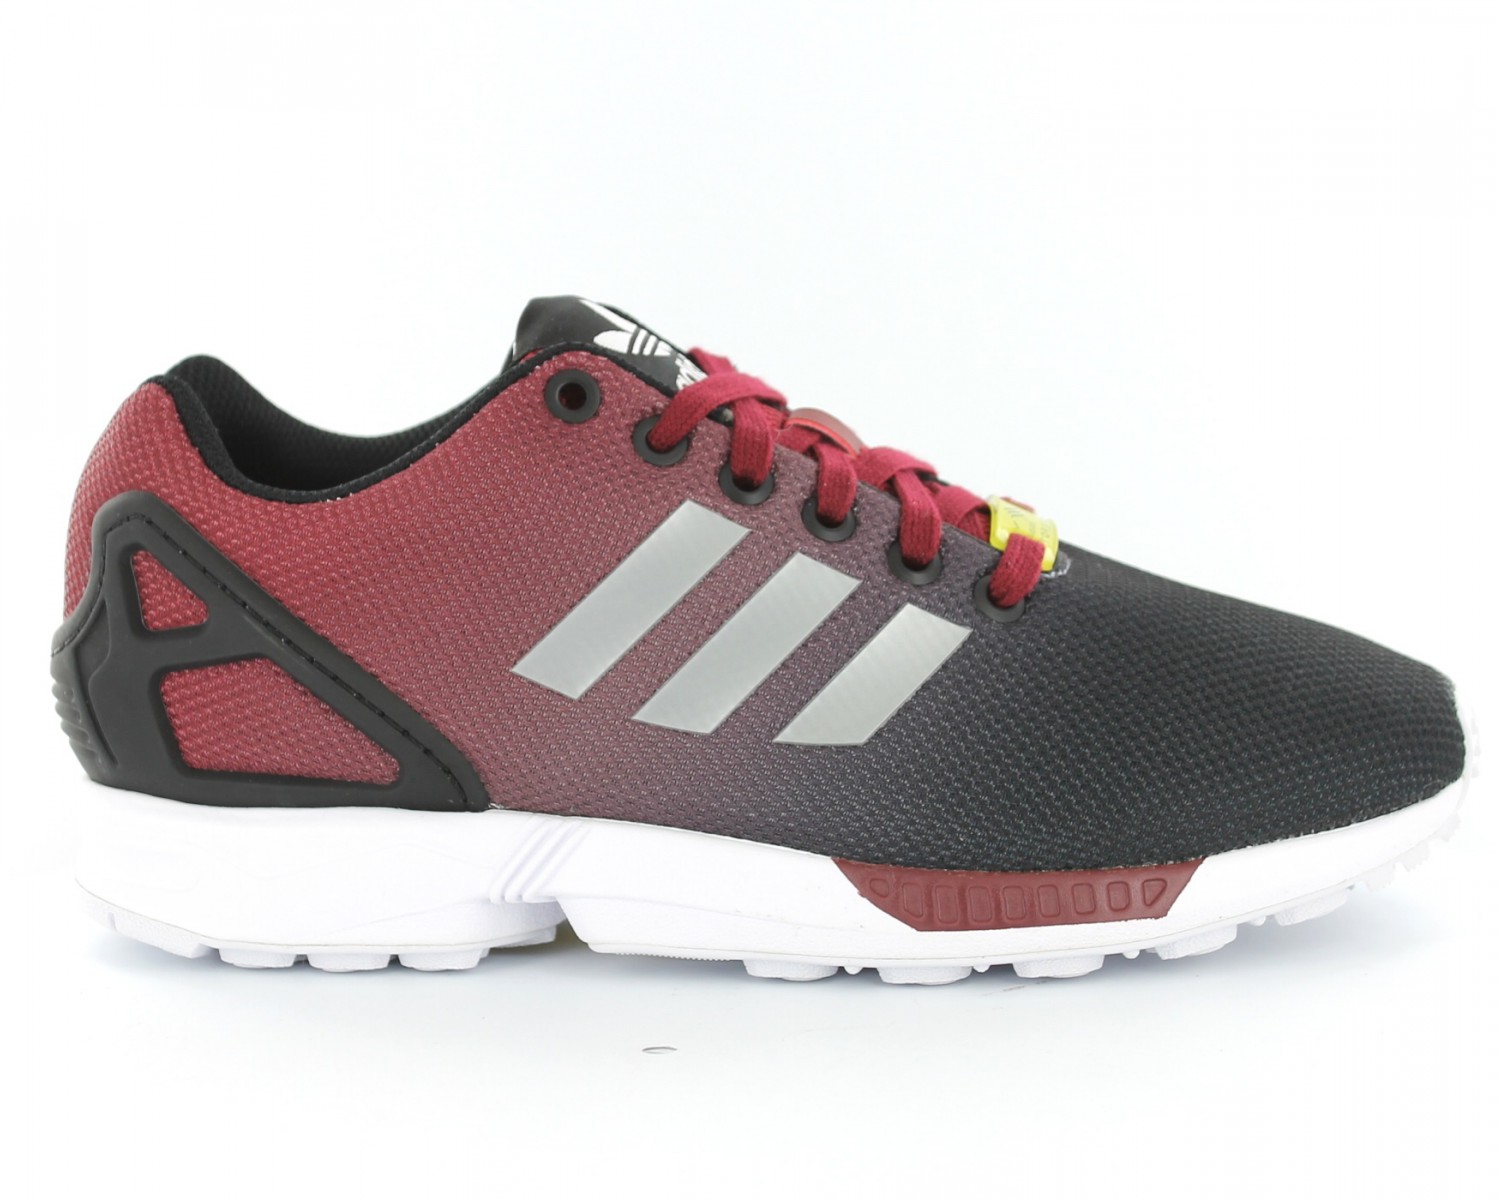 adidas zx flux rouge bordeaux Off 51% - www.bashhguidelines.org